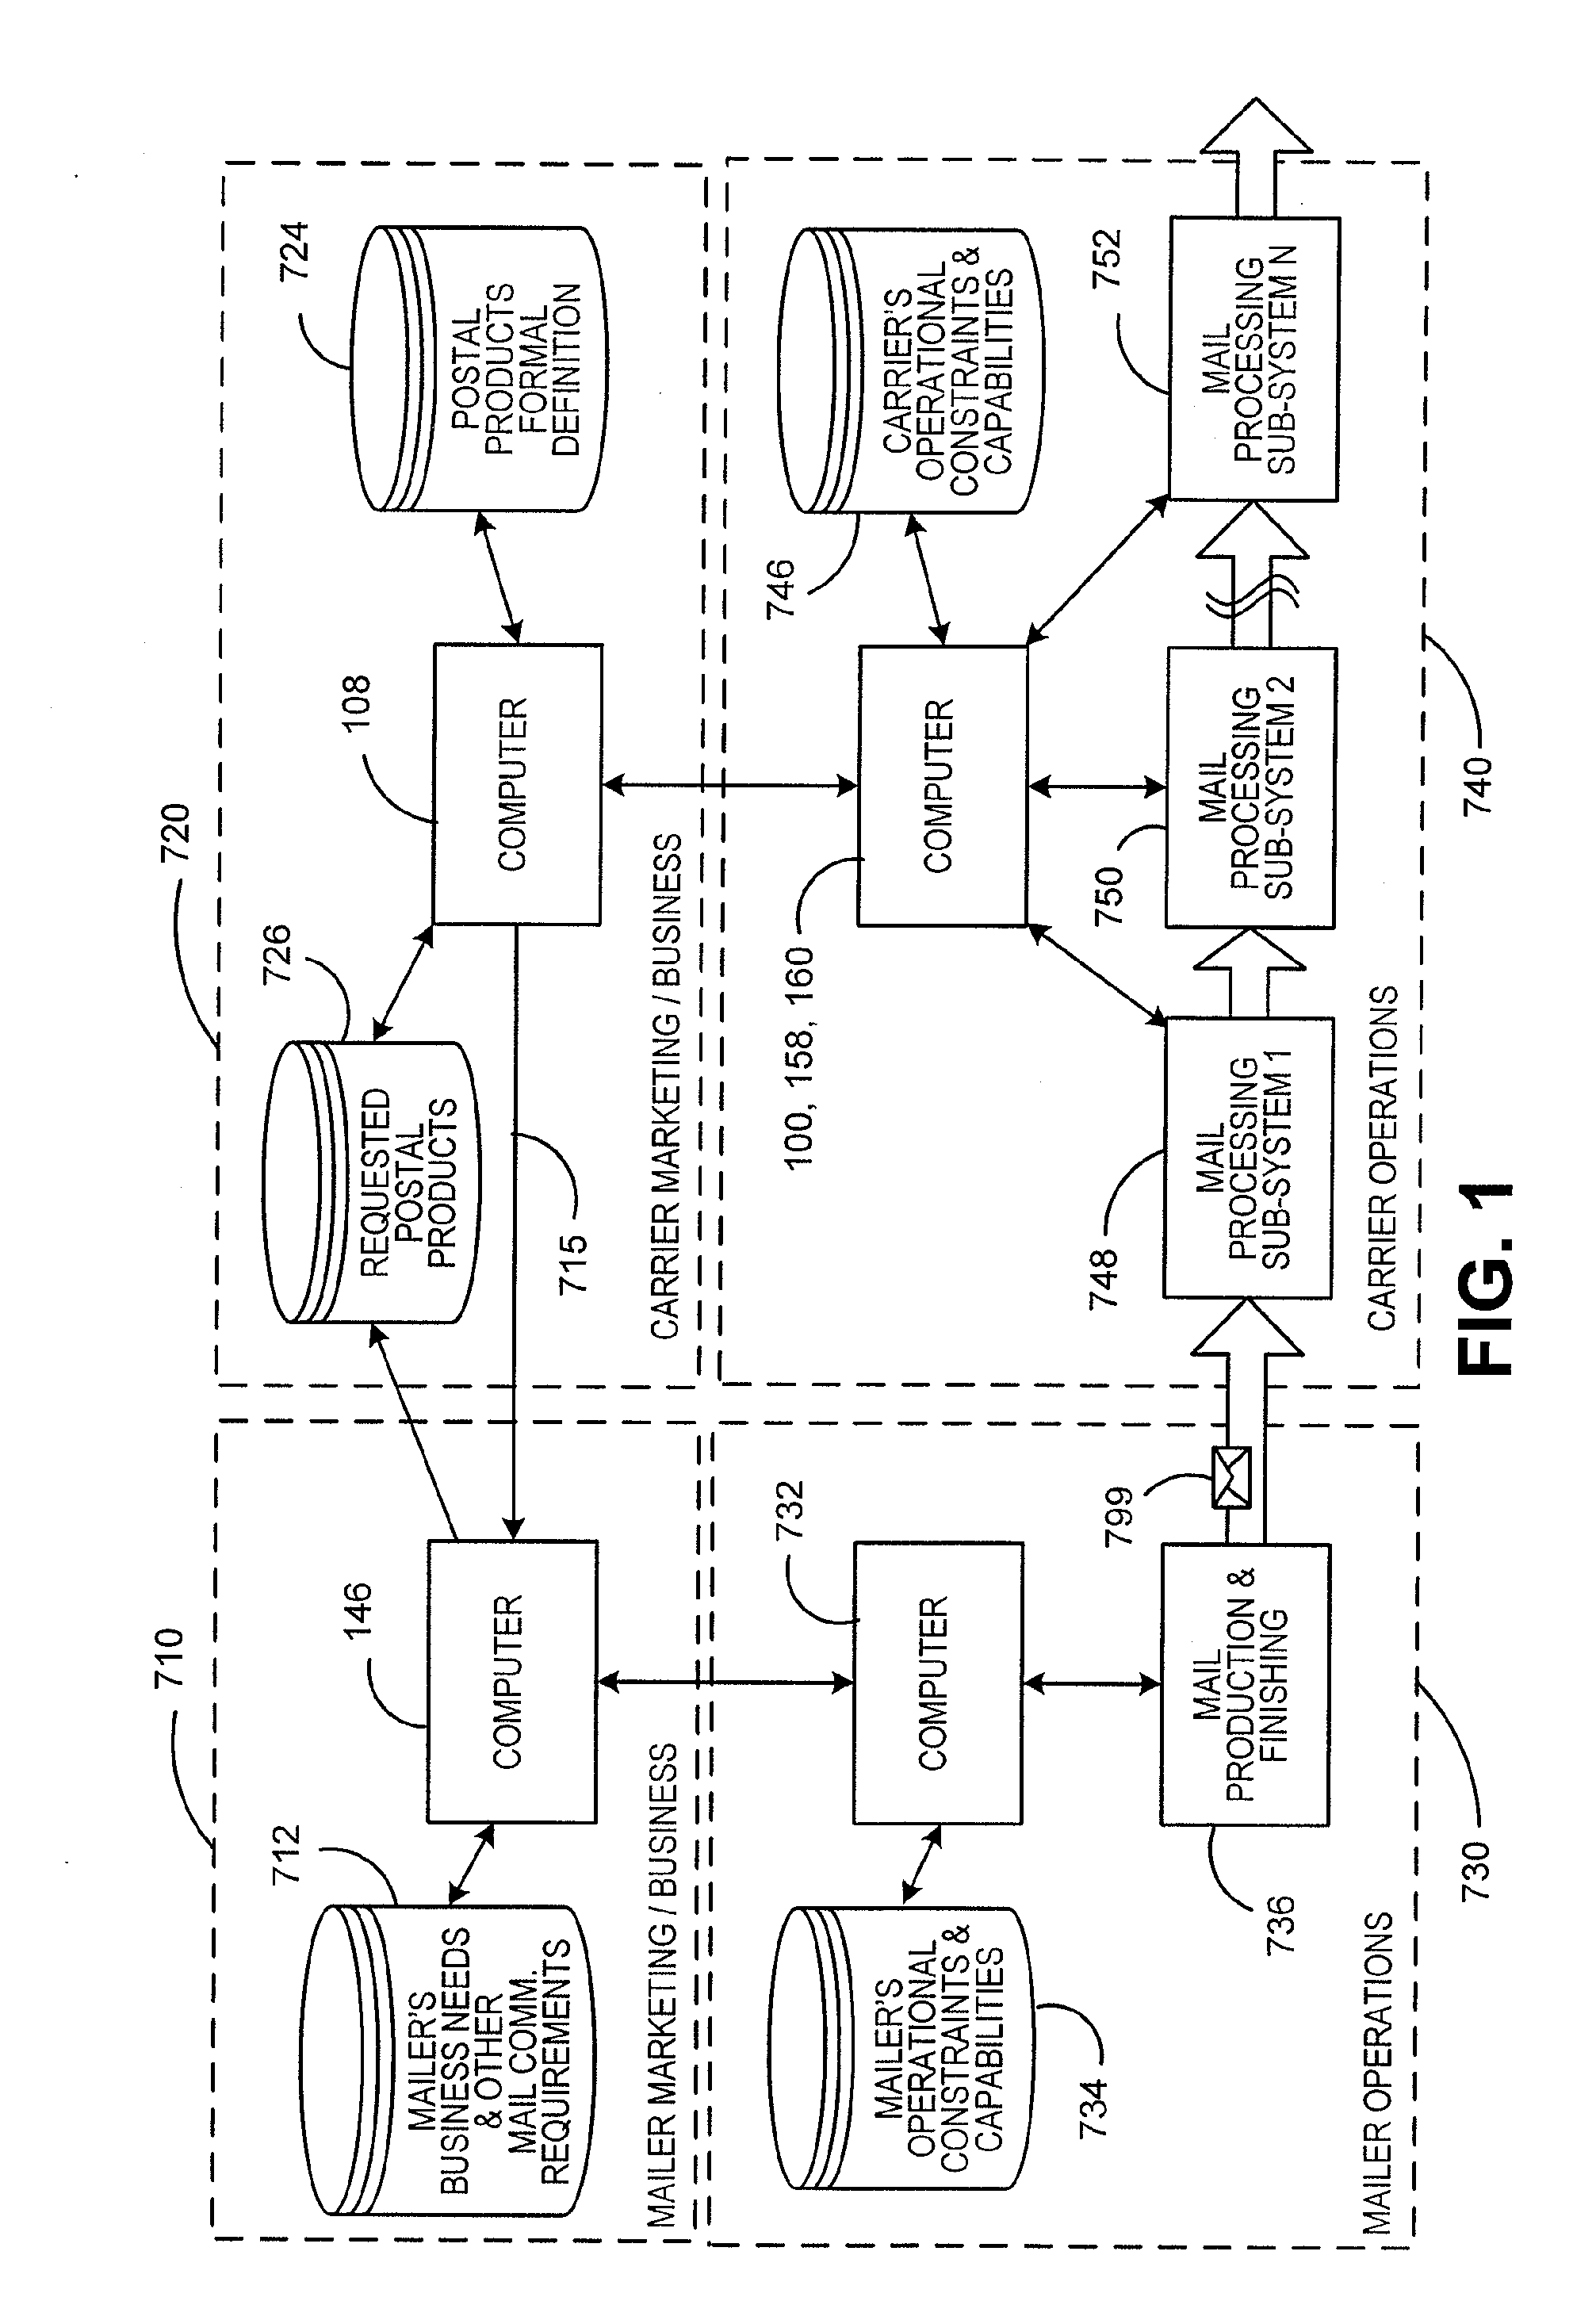 Method for creating and delivering new carrier products